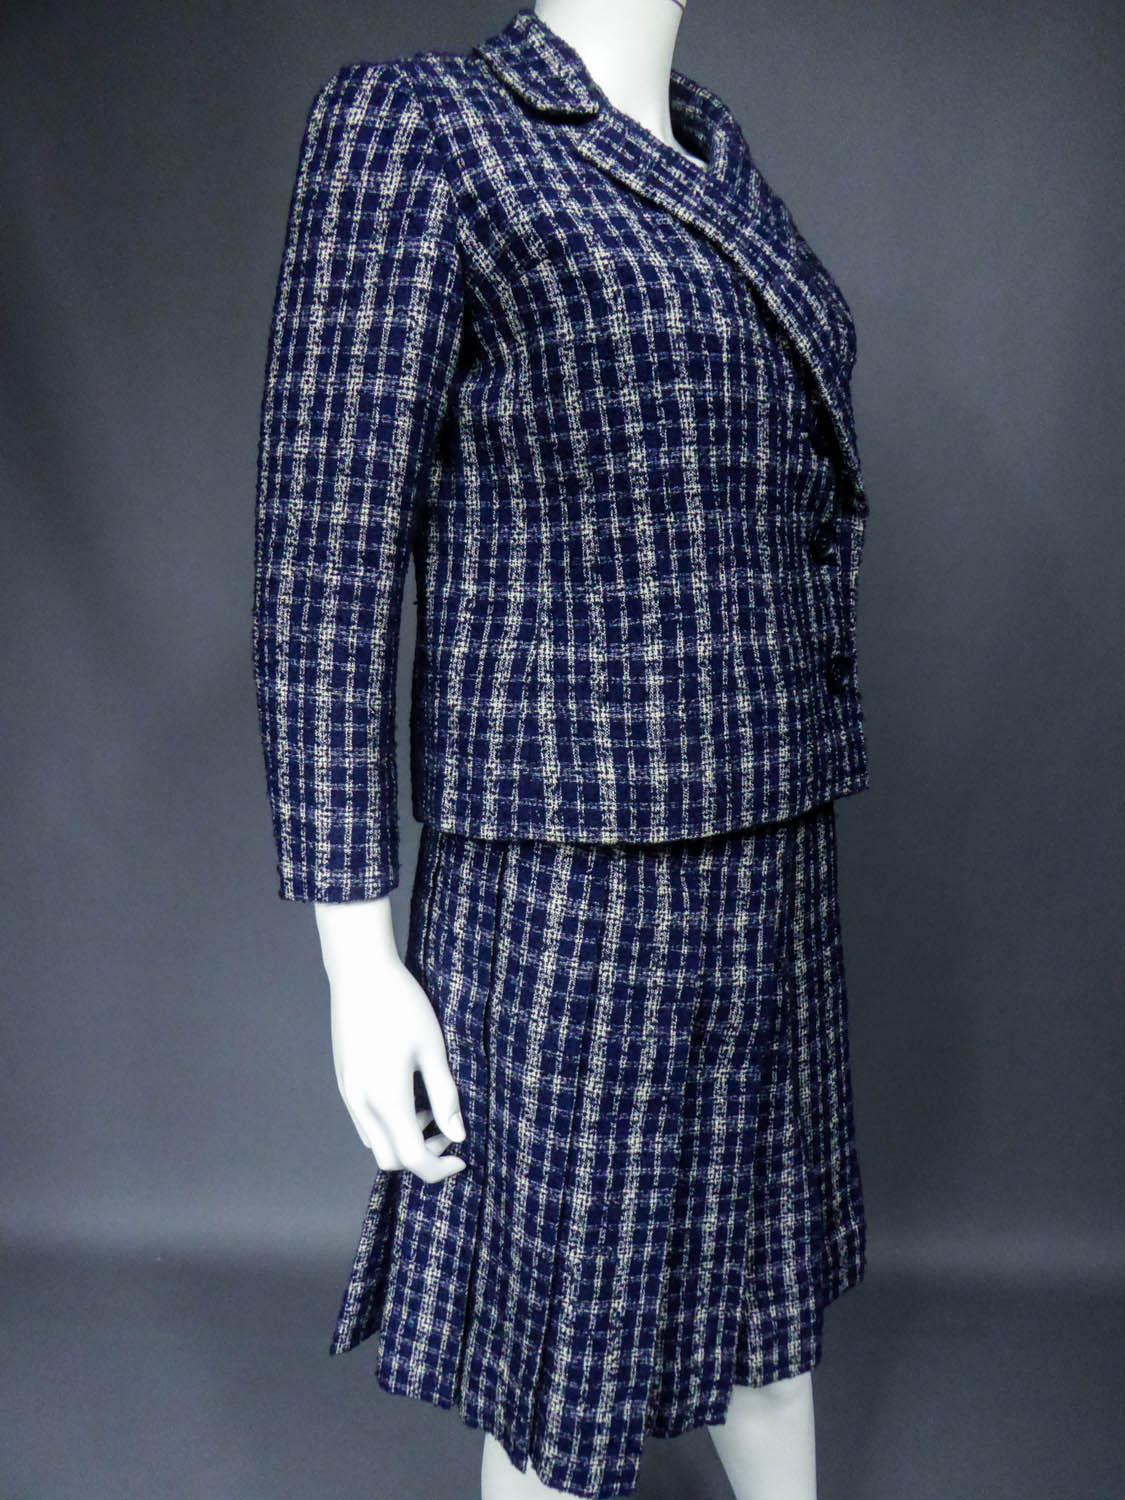 Christian Dior Demi Couture Skirt Suit Set -  numbered 46475 Circa 1962-1965 5